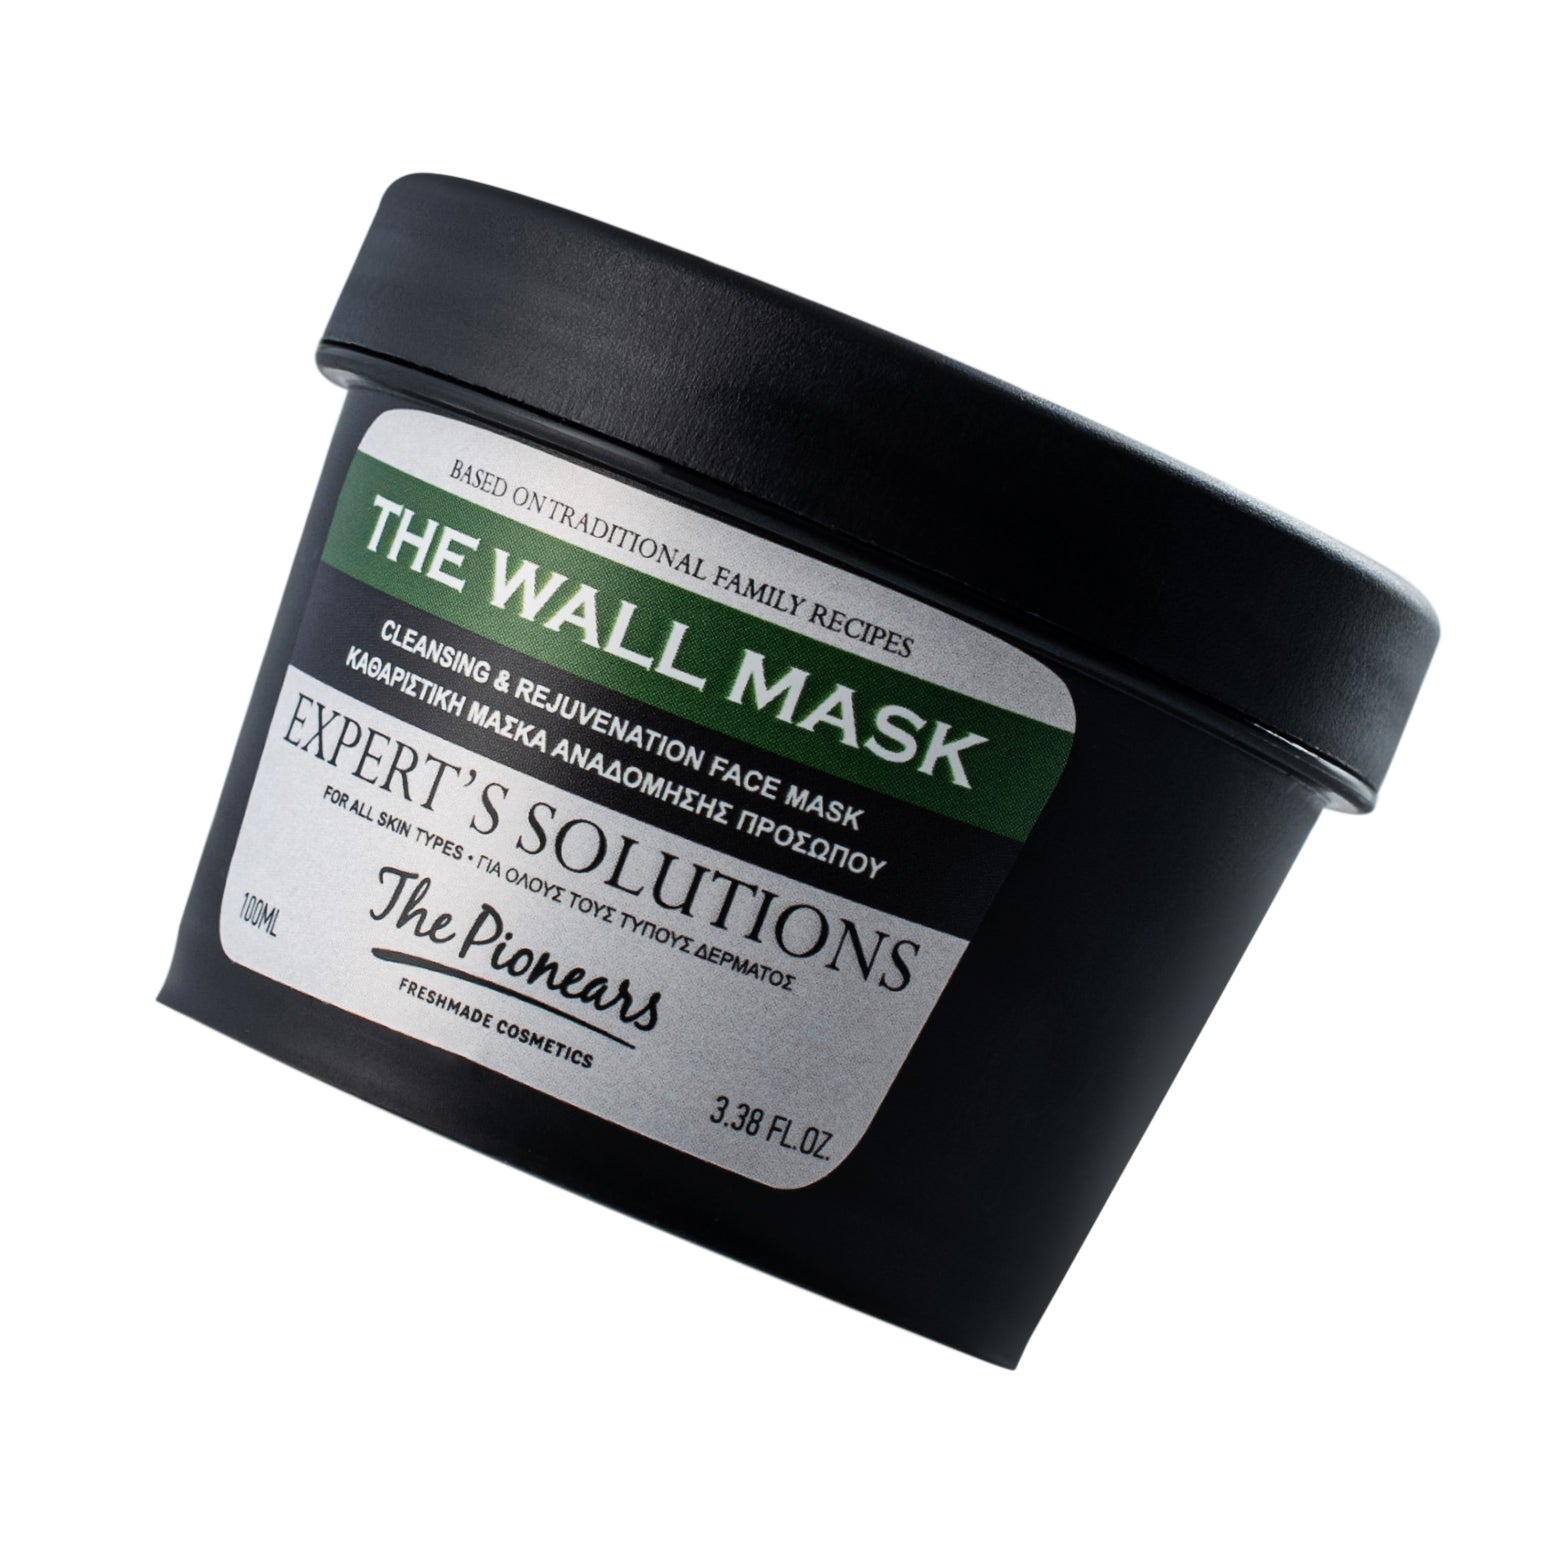 THE WALL MASK - The Pionears